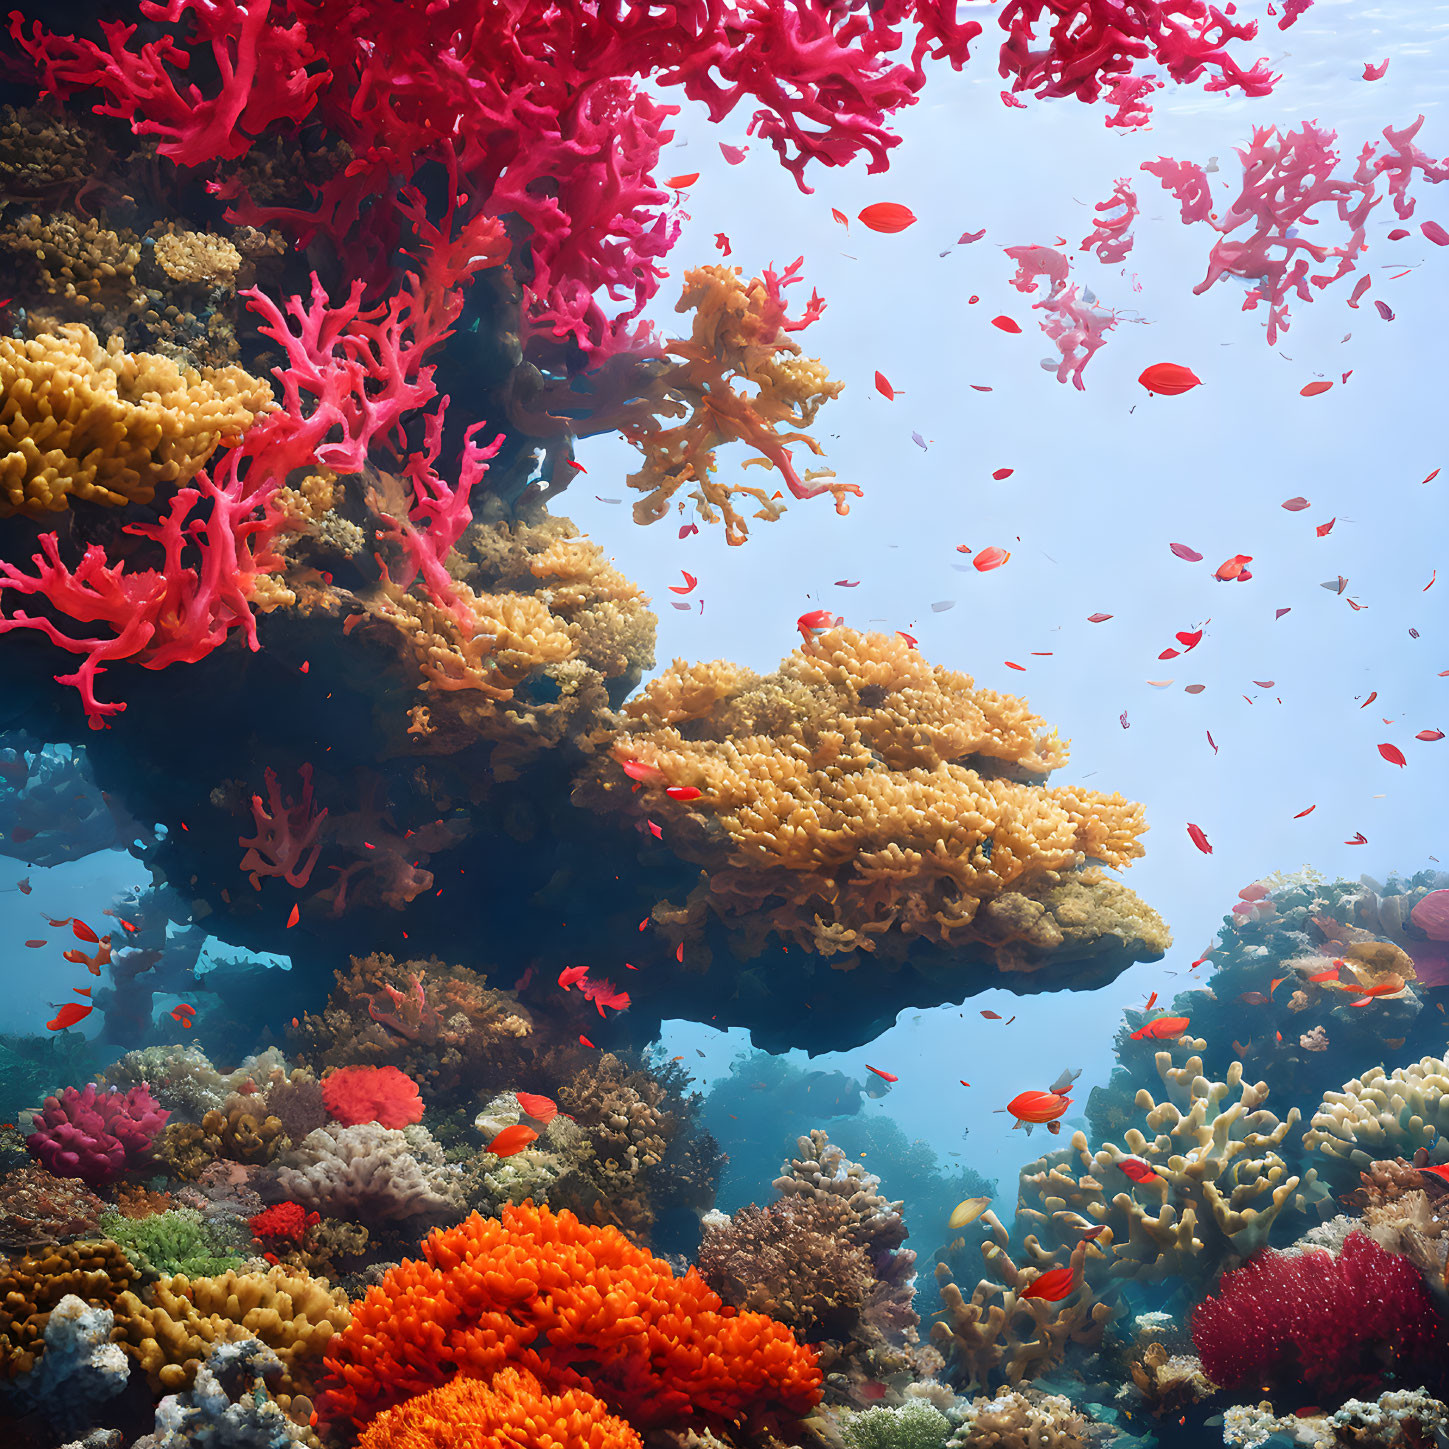 Colorful Coral Reef with Pink, Orange, and Yellow Corals and Red Fish